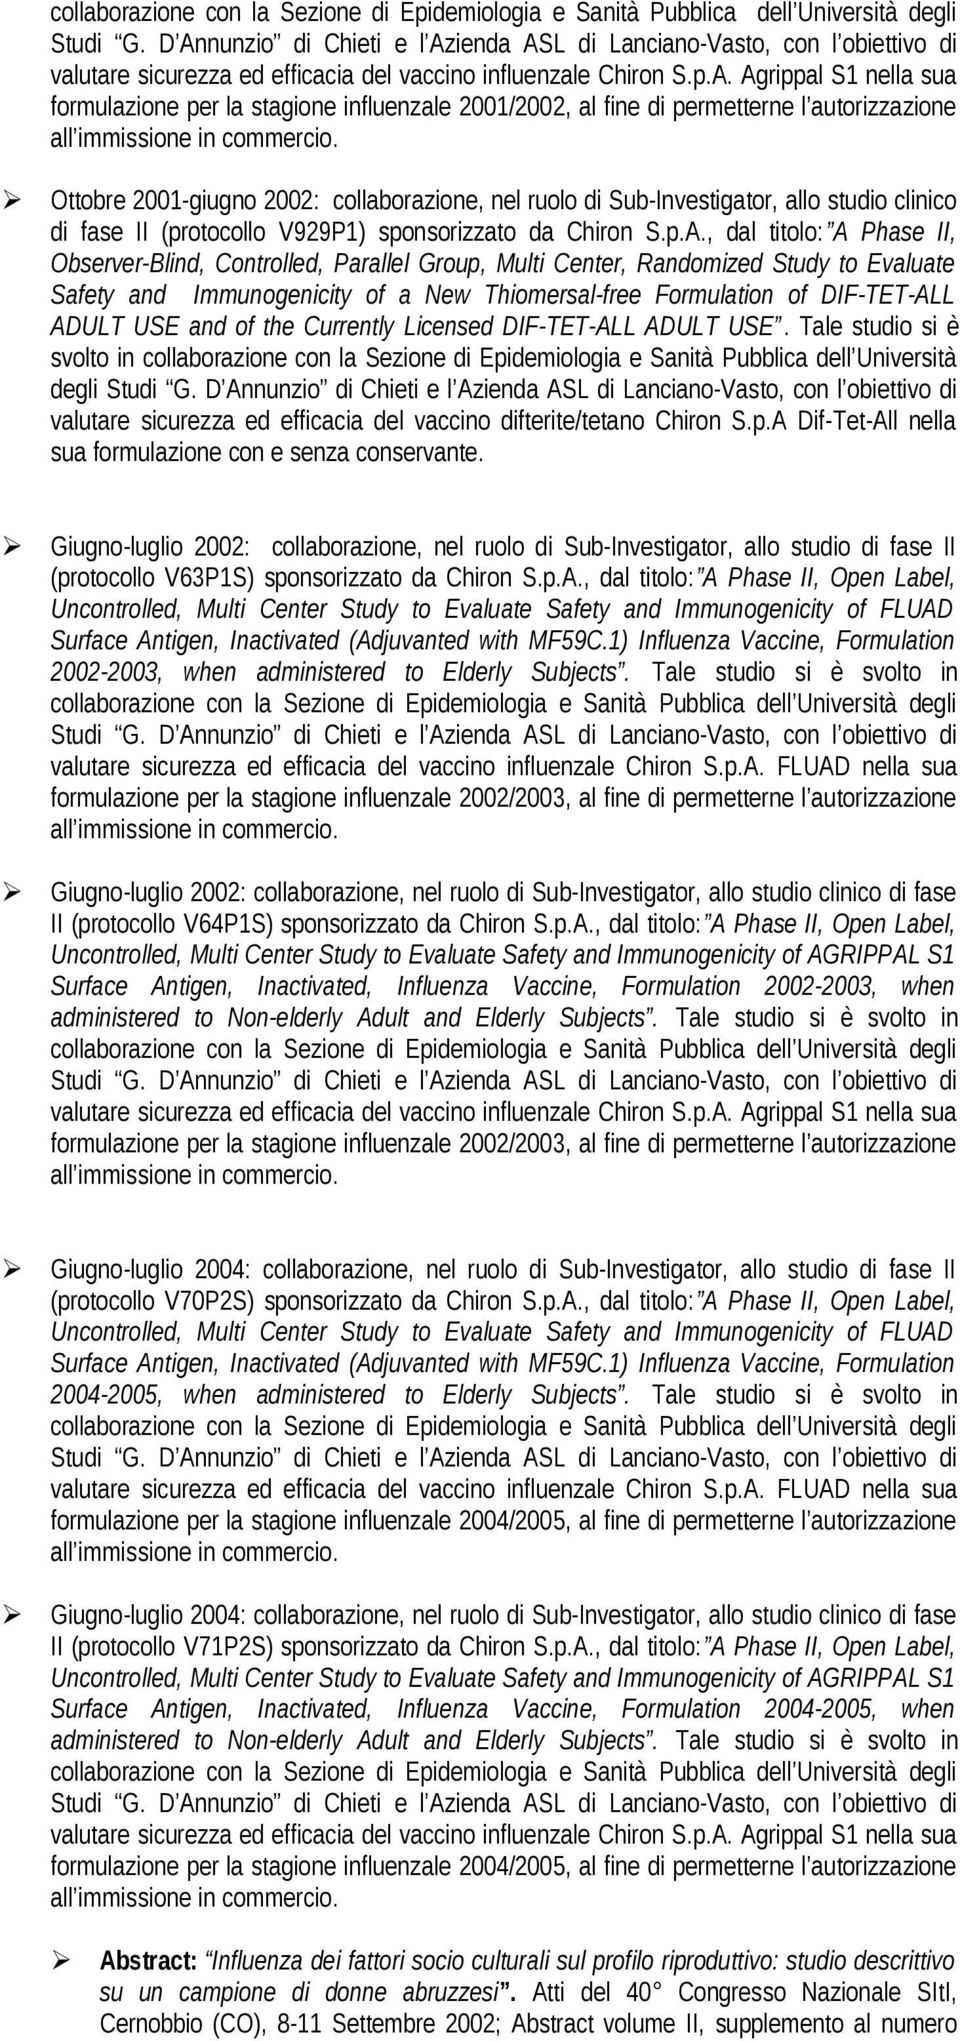 , dal titolo: A Phase II, Observer-Blind, Controlled, Parallel Group, Multi Center, Randomized Study to Evaluate Safety and Immunogenicity of a New Thiomersal-free Formulation of DIF-TET-ALL ADULT